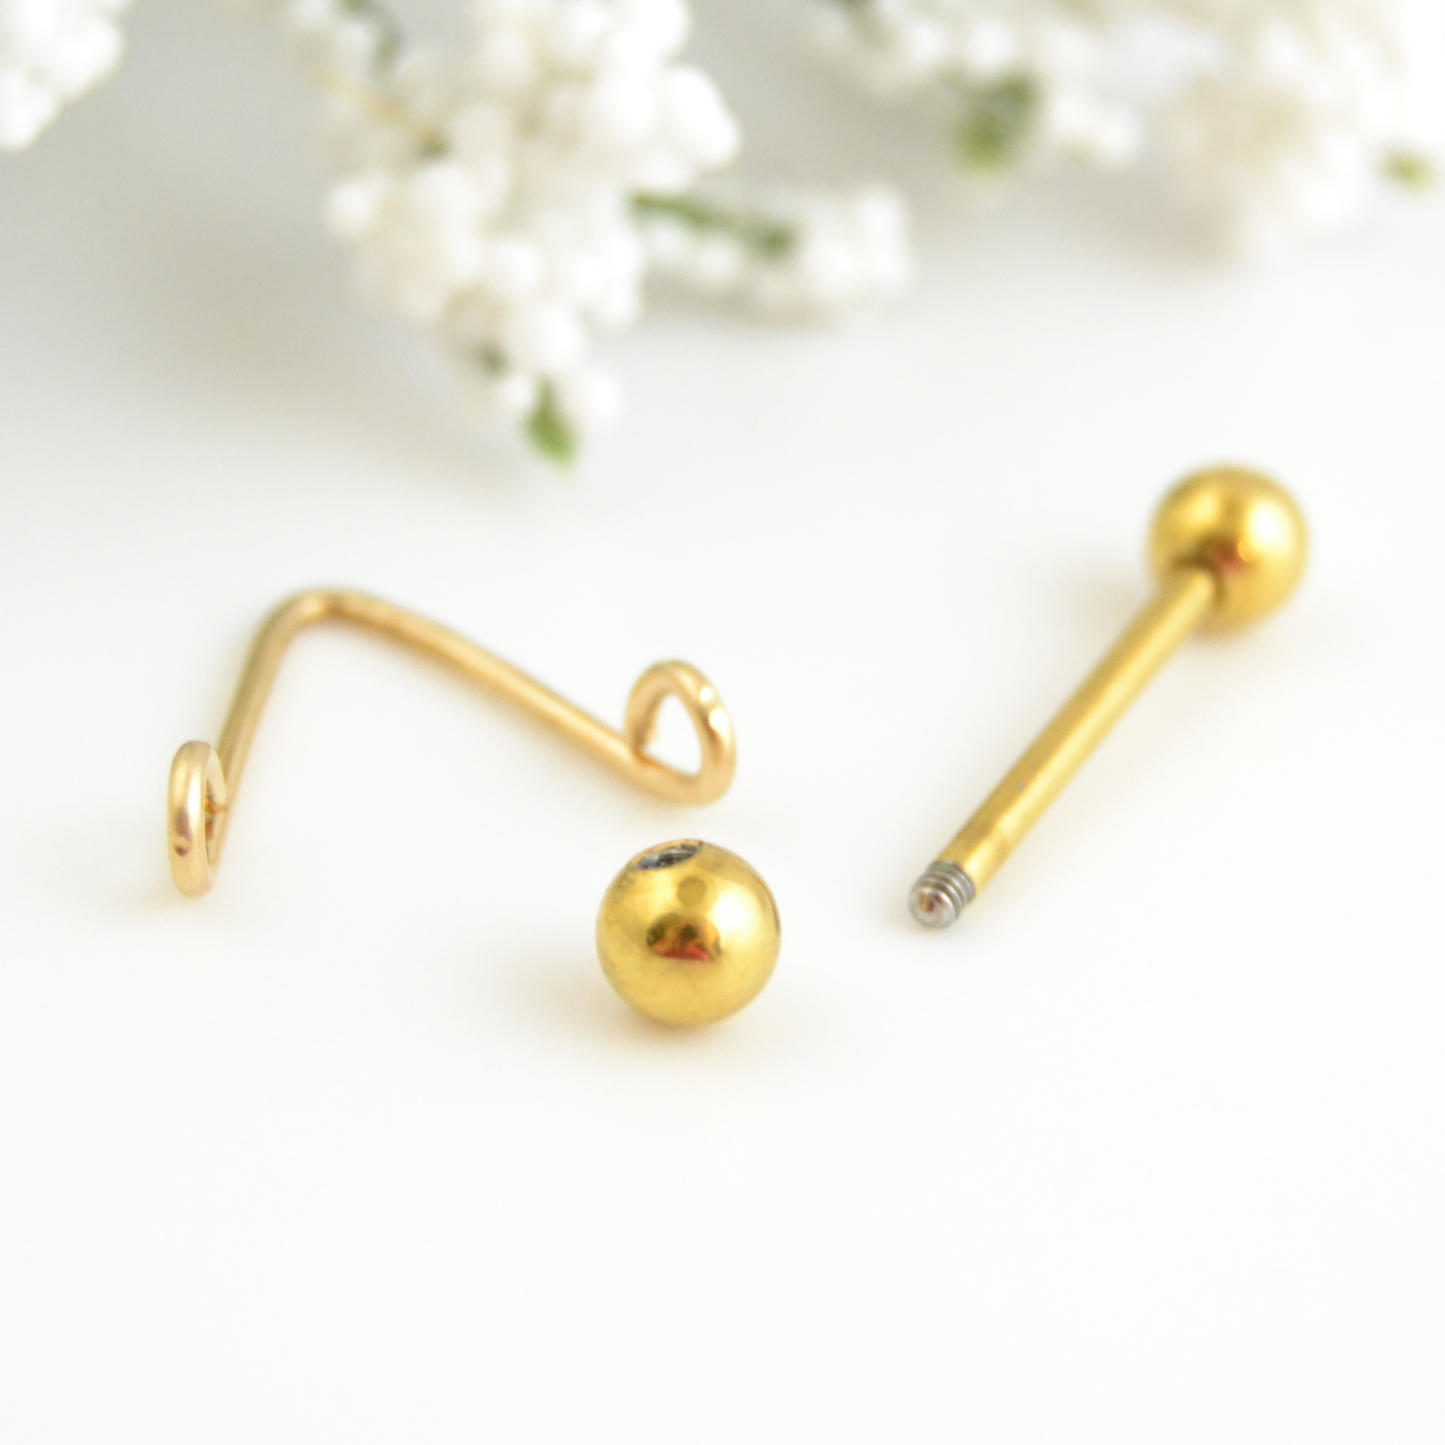 14g Yellow Gold IP 316L Stainless Steel Hammered Chevron Nipple Ring